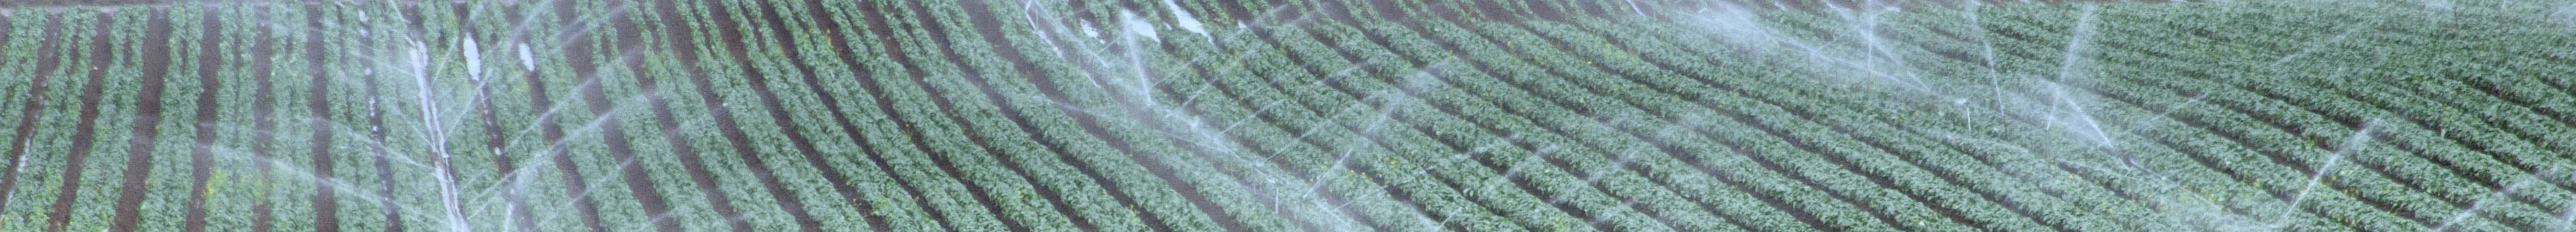 Central Valley crops being watered